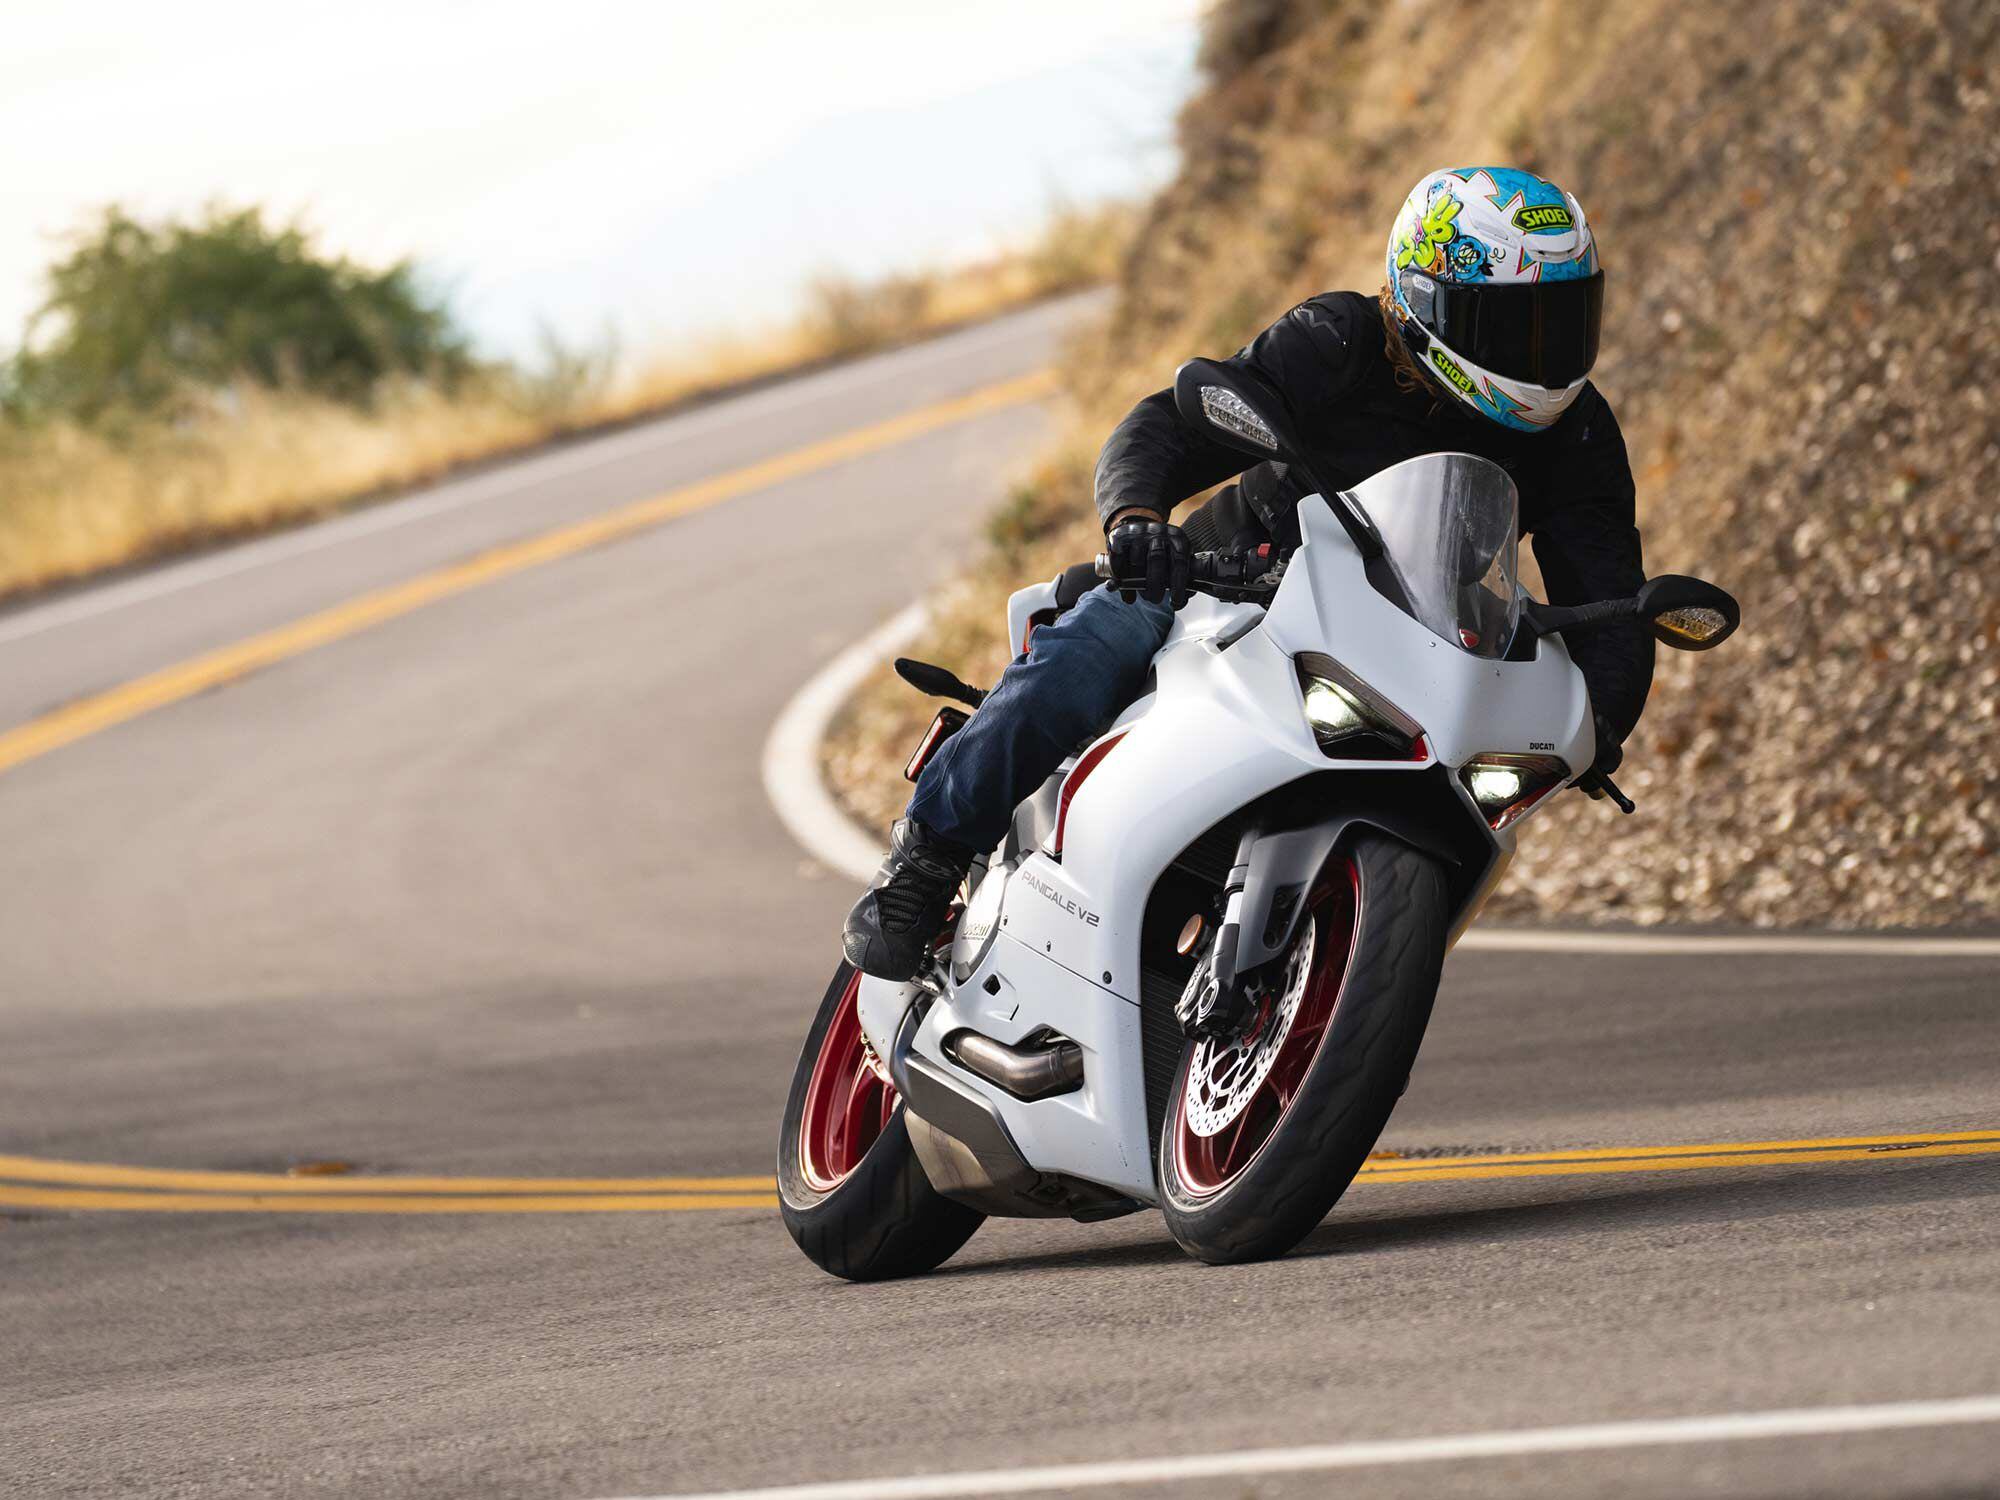 The Panigale V2 is an exhilarating midsize-plus sportbike. We appreciate its nimble handling and rev-happy 955cc L-twin engine.